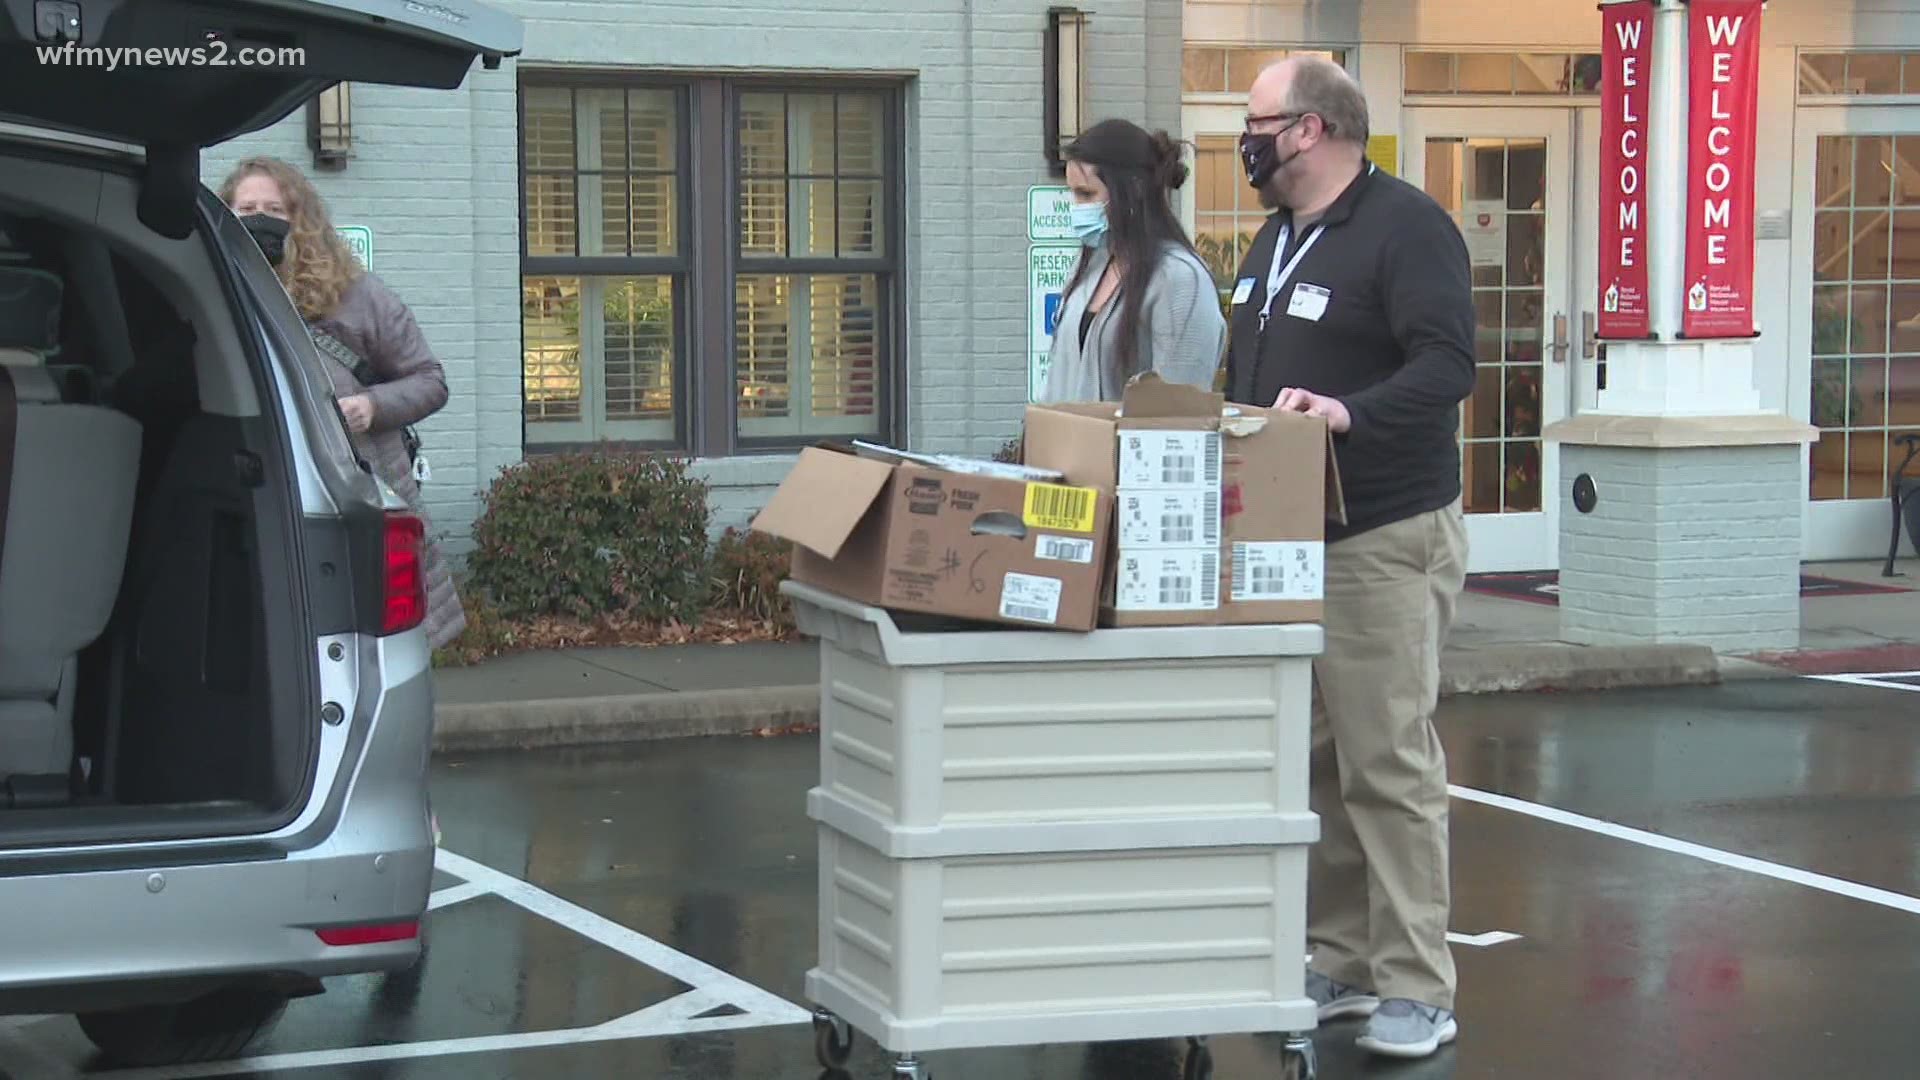 Heart and Home in Winston-Salem donated meals to Ronald McDonald House. The house has remained open during the pandemic.